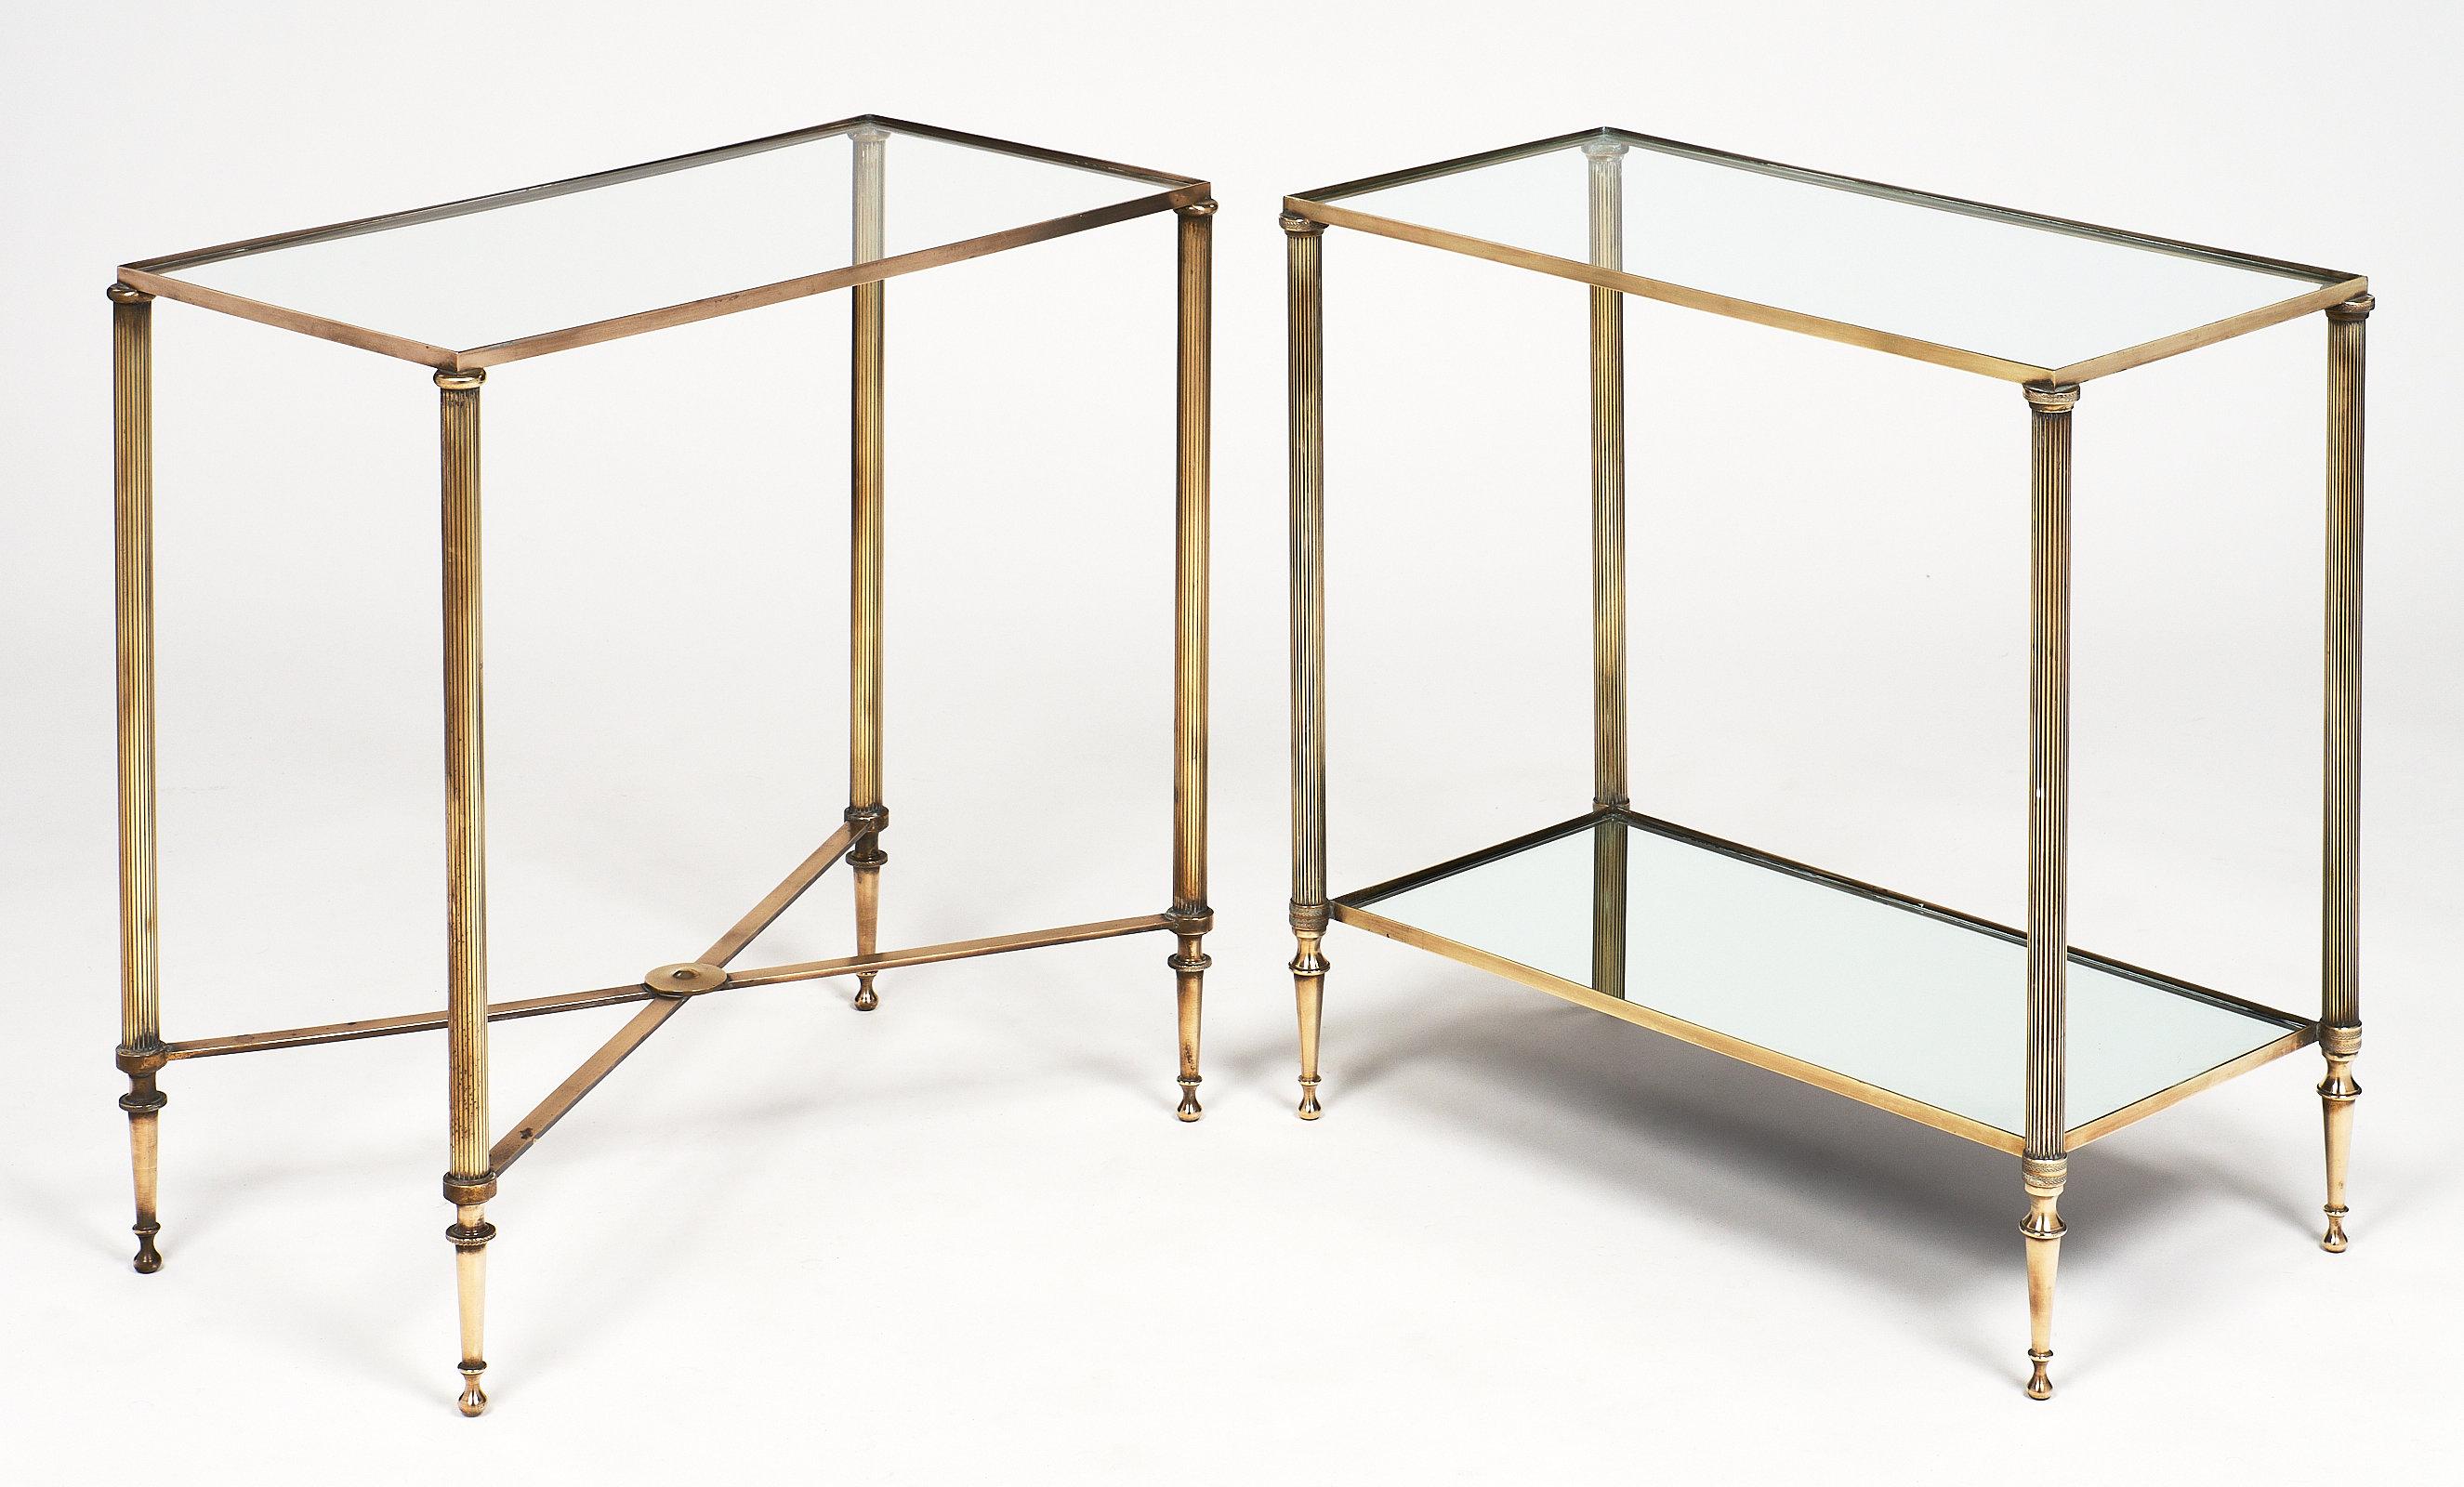 Fine French set of side tables by Maison Baguès. These brass tables each feature a glass top and tapered legs. They are a faux pair, as one has a mirrored lower shelf, and the other has an X-shaped stretcher. The tables differ in size only slightly.